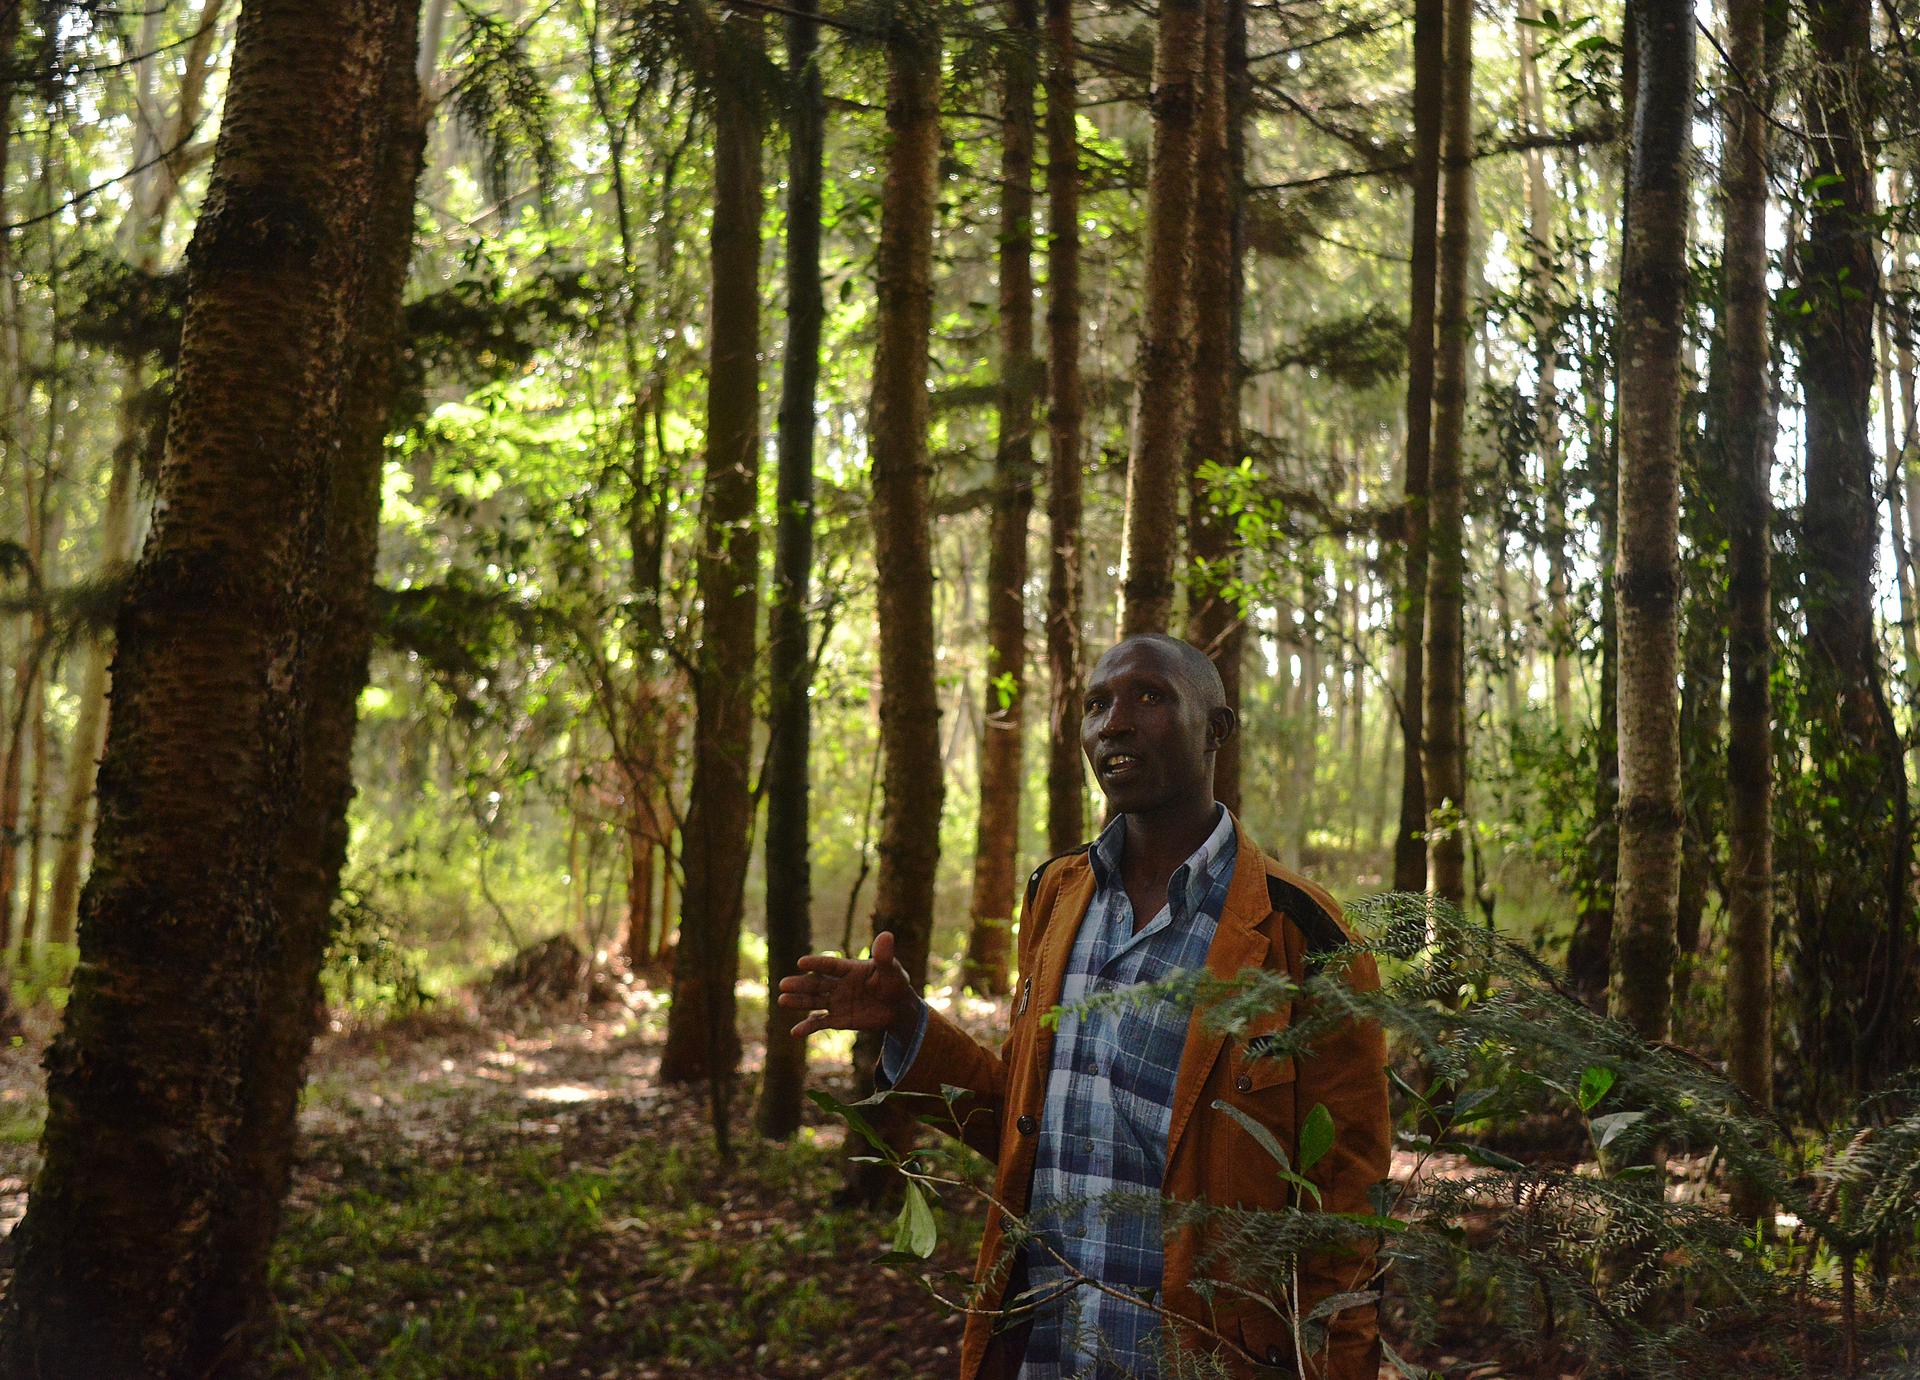 Elias Kimaiyo says the Kenya Forest Service has burned down his home repeatedly as part of a push to evict him and other members of the Senger, an indigenous tribe, from the forests where they have lived for generations. 